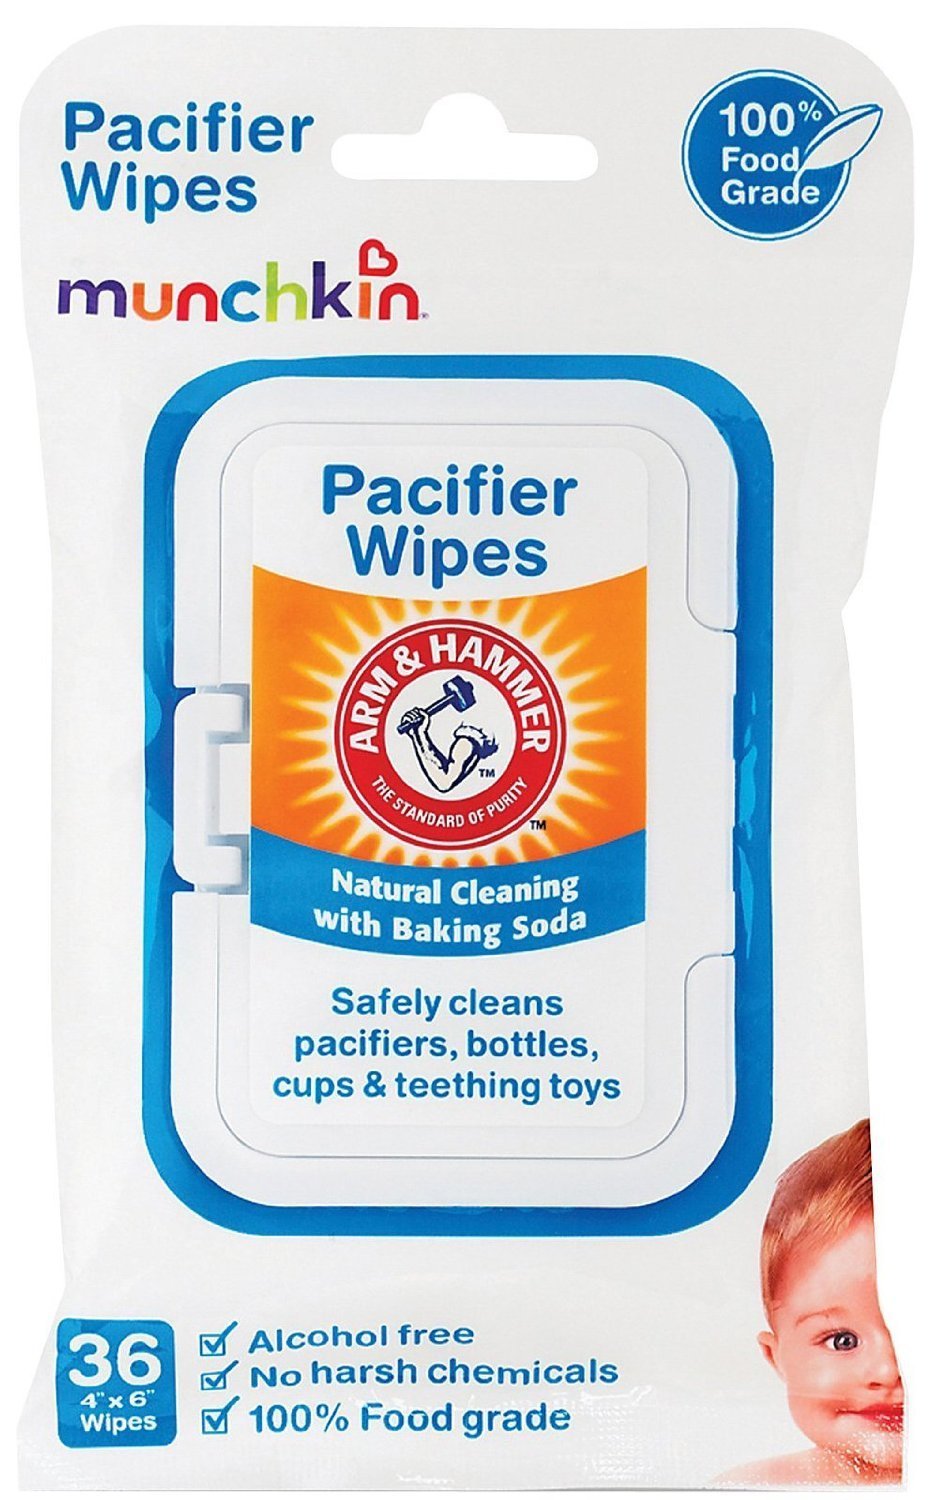 Munchkin Arm & Hammer Pacifier Wipes - 4 Packs of 36 Wipes Total 144 Count